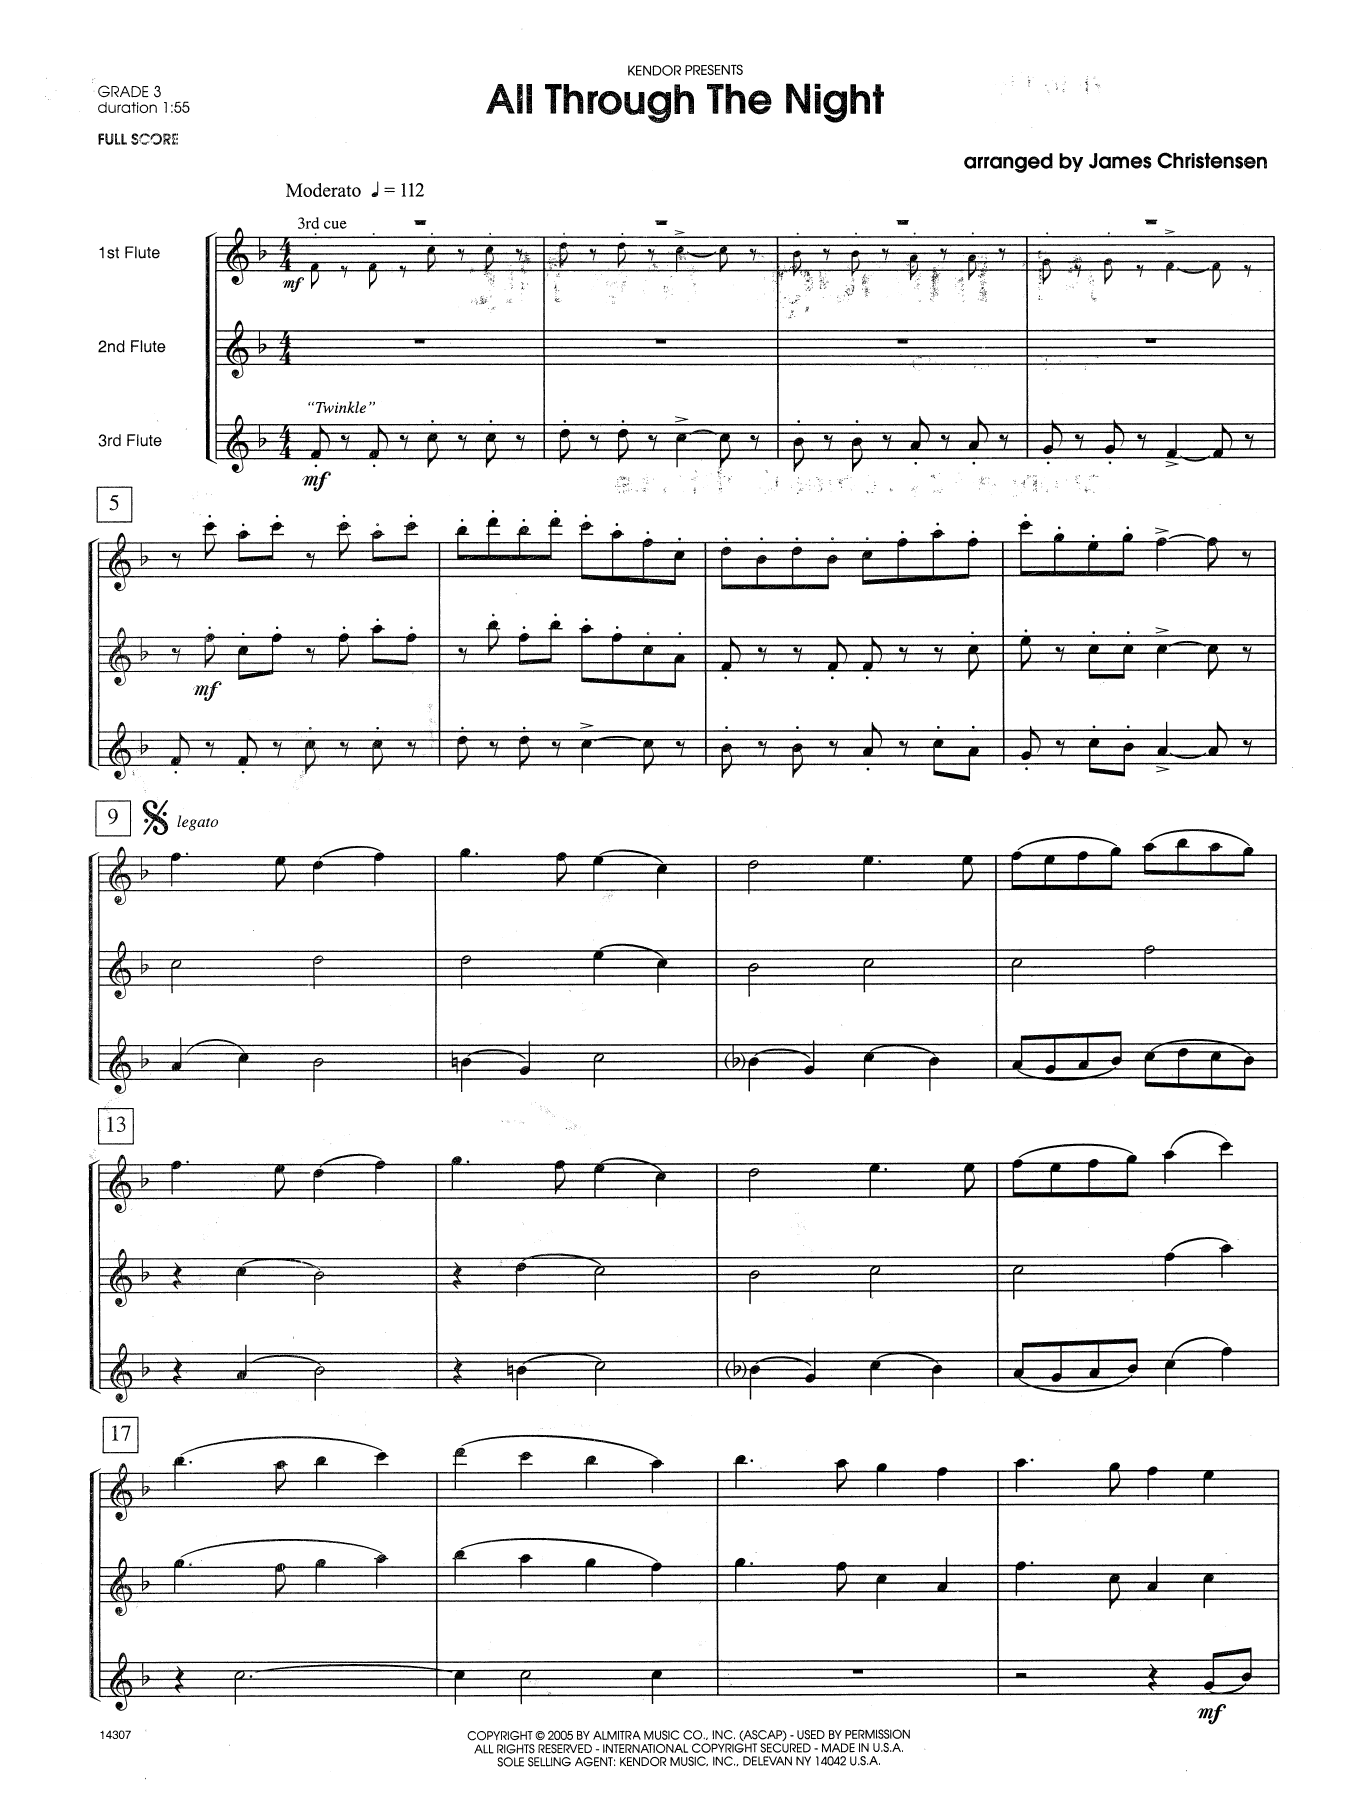 James Christensen All Through the Night - Full Score sheet music notes and chords. Download Printable PDF.